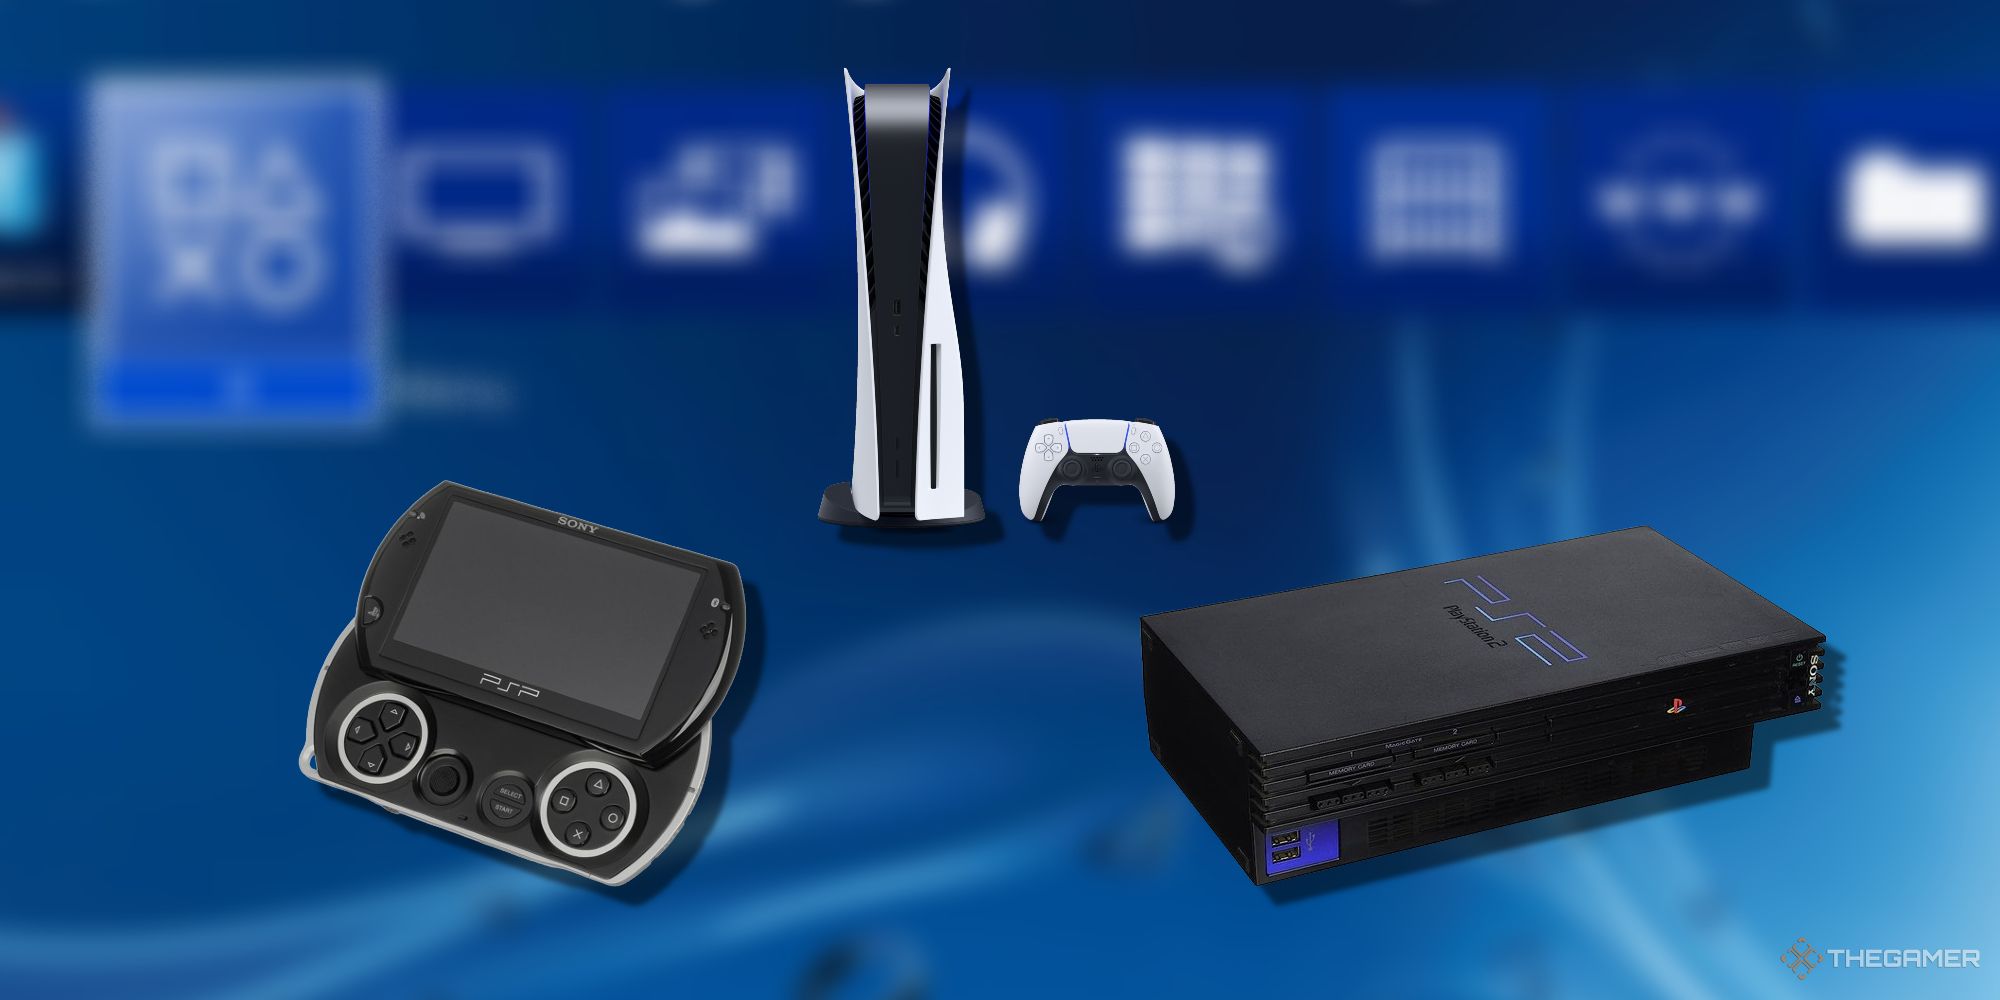 transparent psp go, ps5, and ps2 on a blurred image of ps4 menu